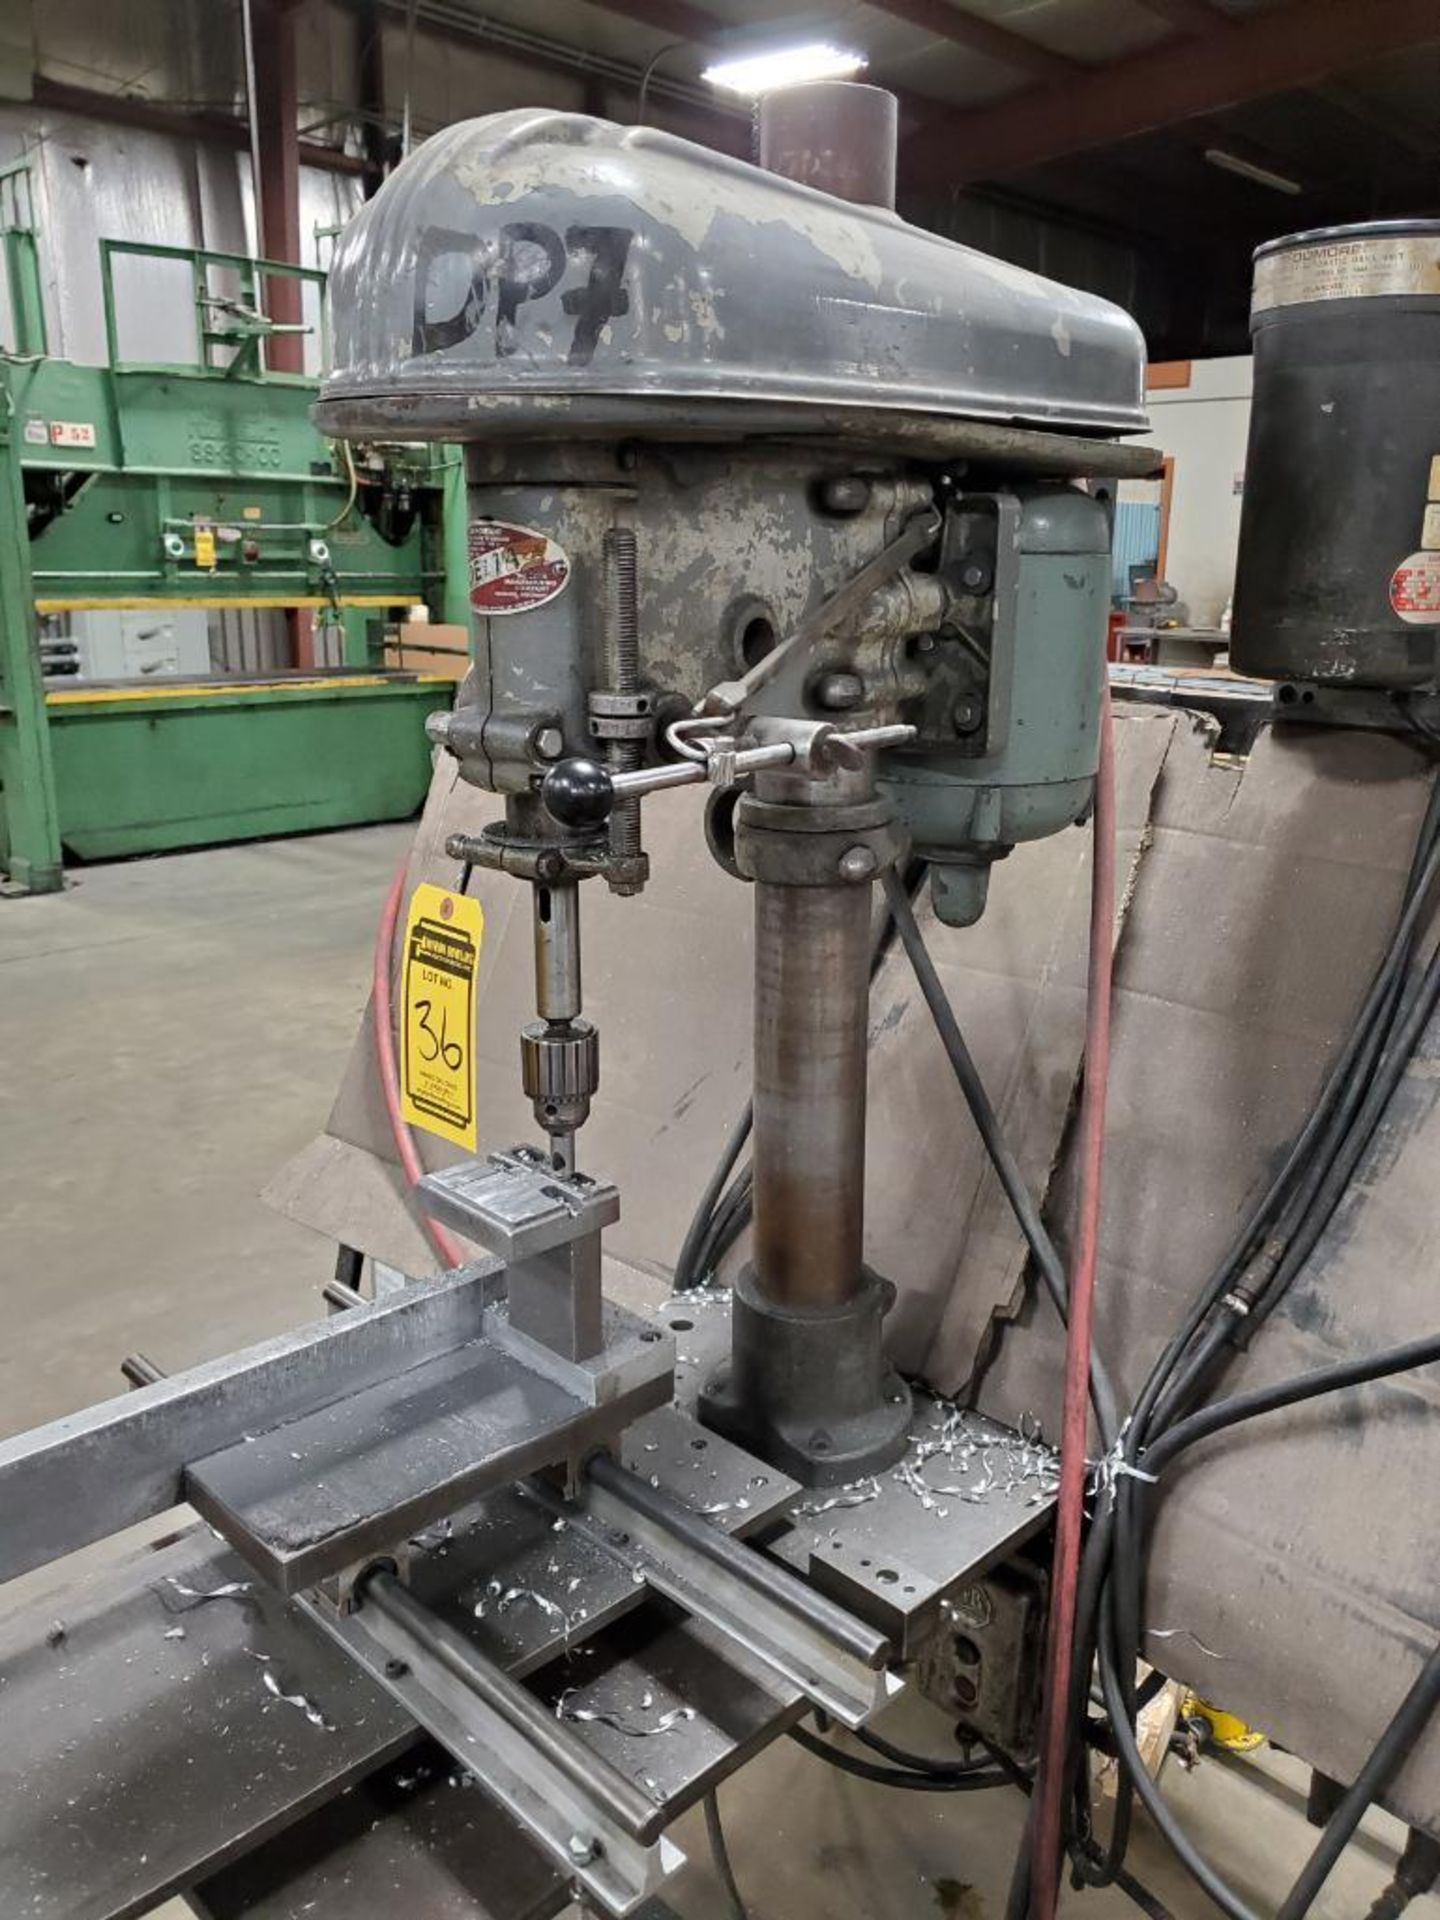 (2) DUMORE VERTICAL DRILL HEADS MOUNTED ON CUSTOM DEBURRING STATION, 3/4 HP ON STEEL STRUCTURE W/ DE - Image 8 of 9